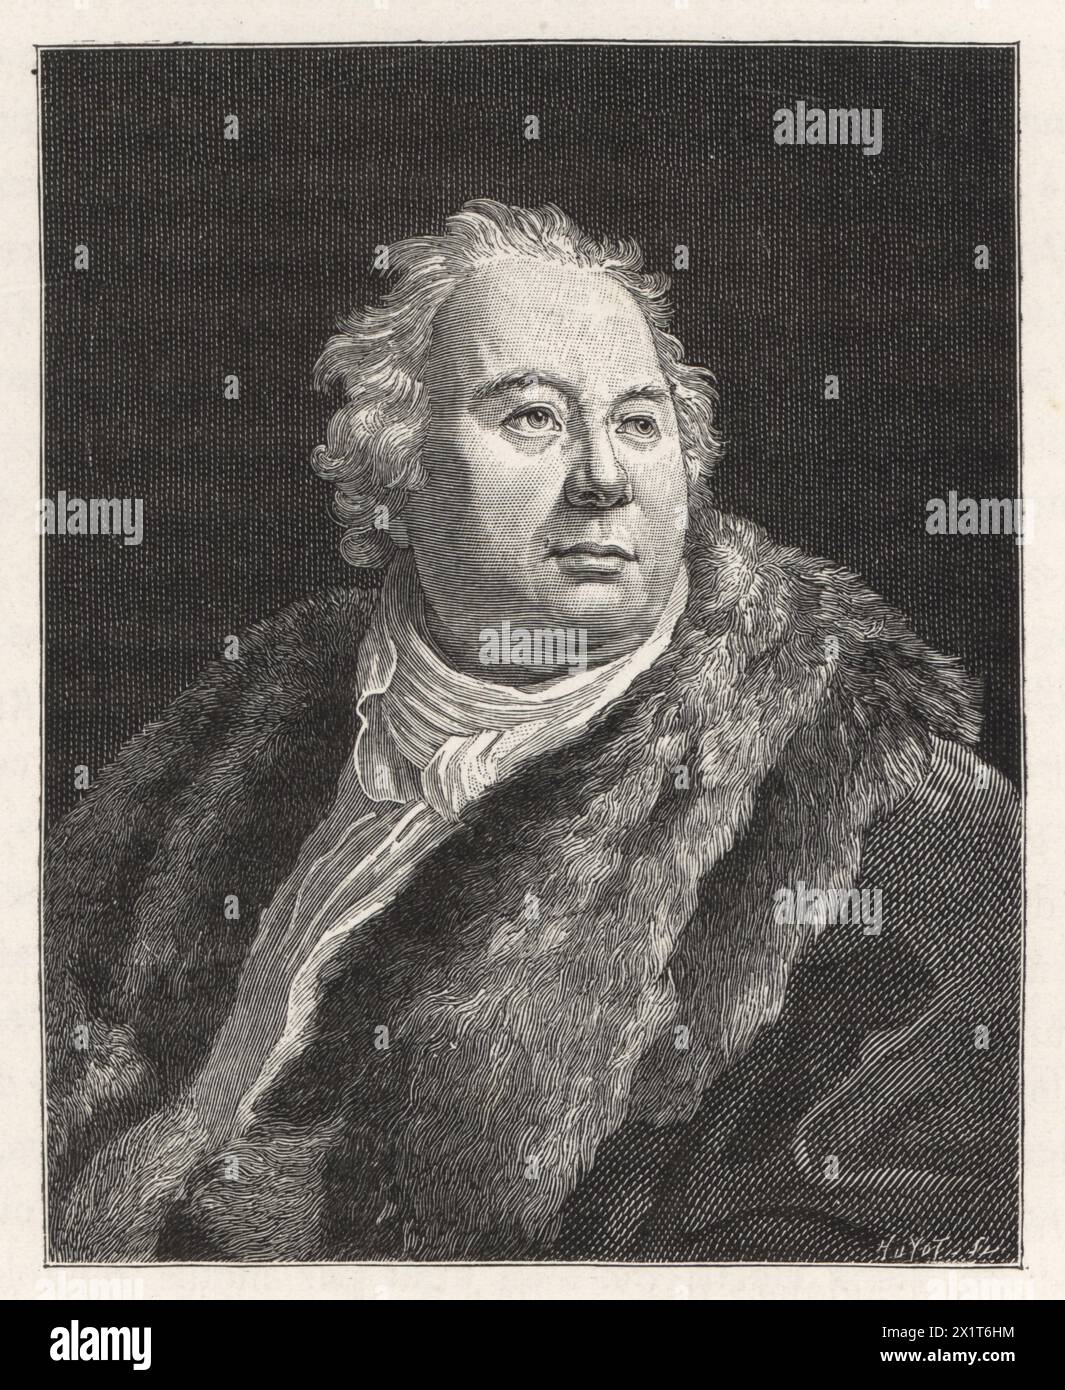 Jean-François Ducis, French dramatist, adapter of Shakespeare, member of the French Academy, 1733-1816. Woodcut by Huyot after a portrait by François Gérard from Paul Lacroix's Directoire, Consulat et Empire, (Directory, Consulate and Empire), Paris, 1884. Stock Photo